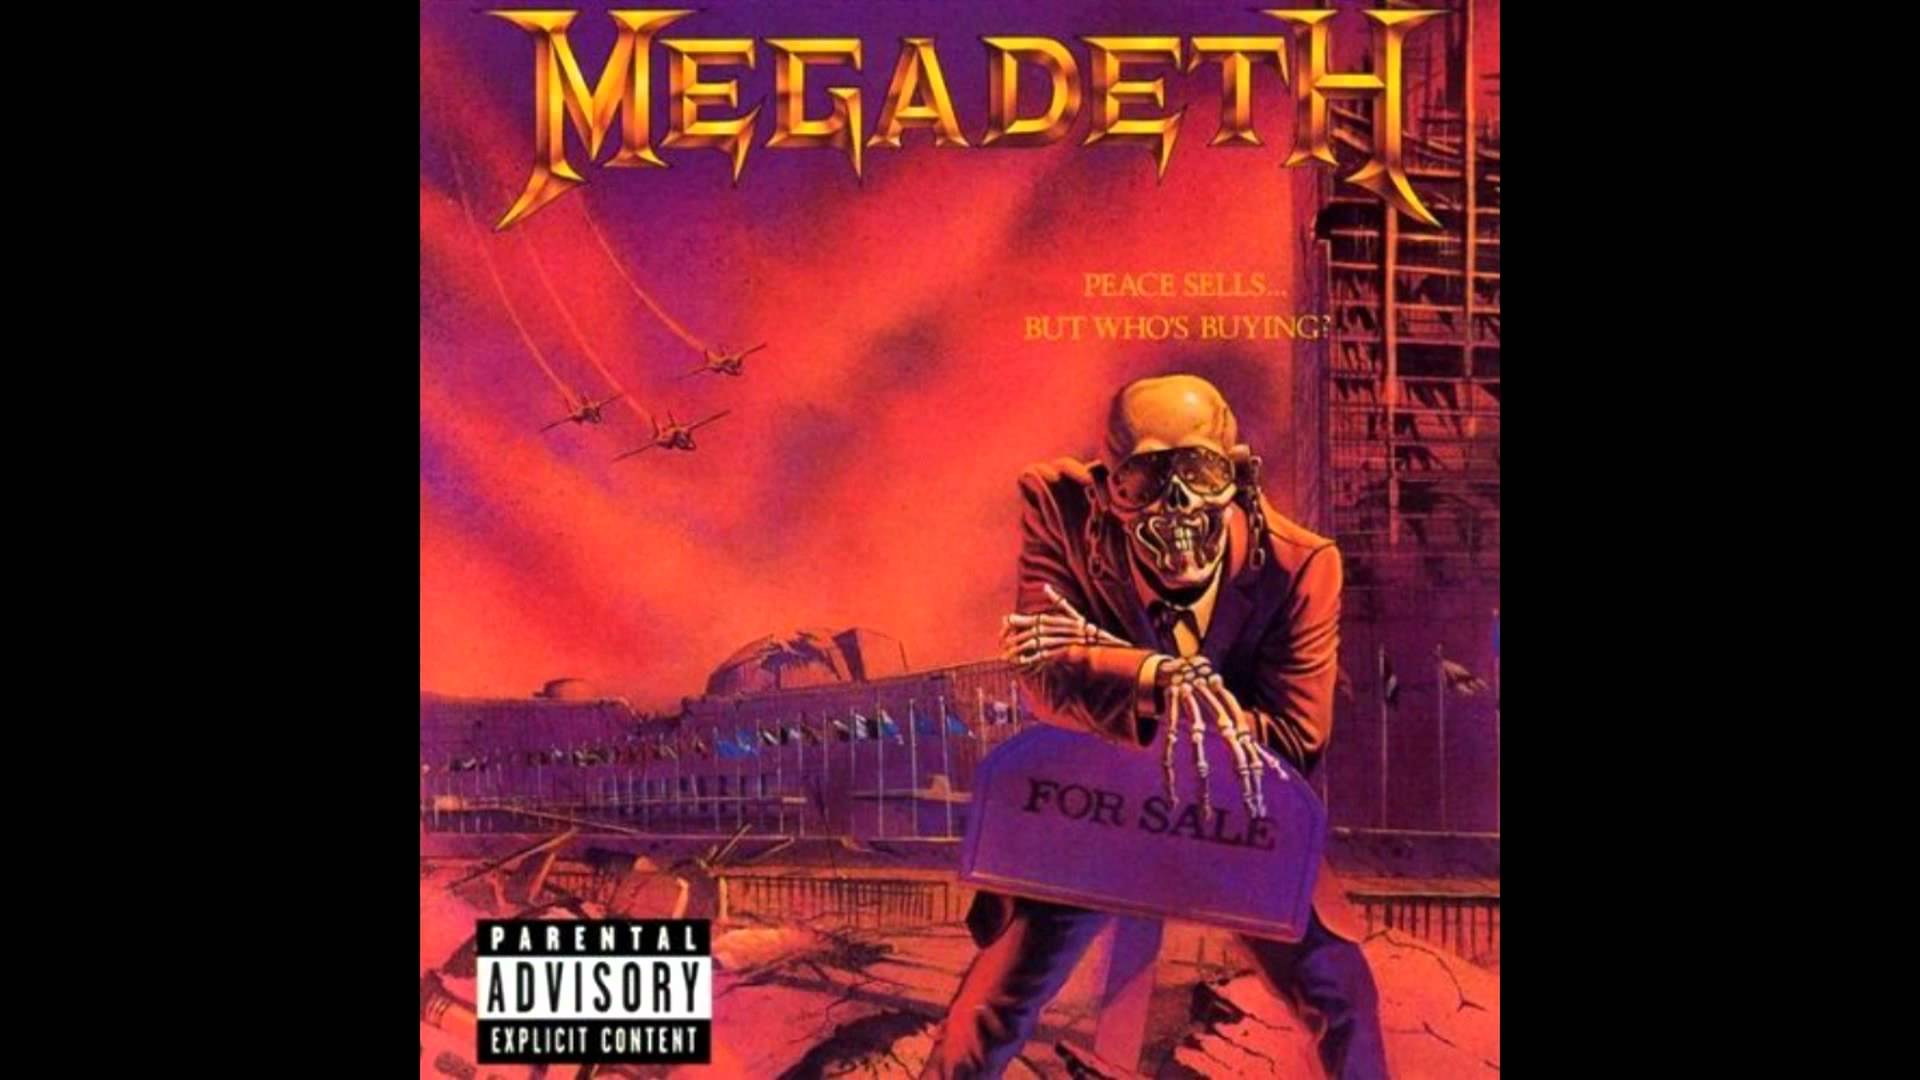 Awesome Albums: Peace Sells. But Who's Buying? (Megadeth)